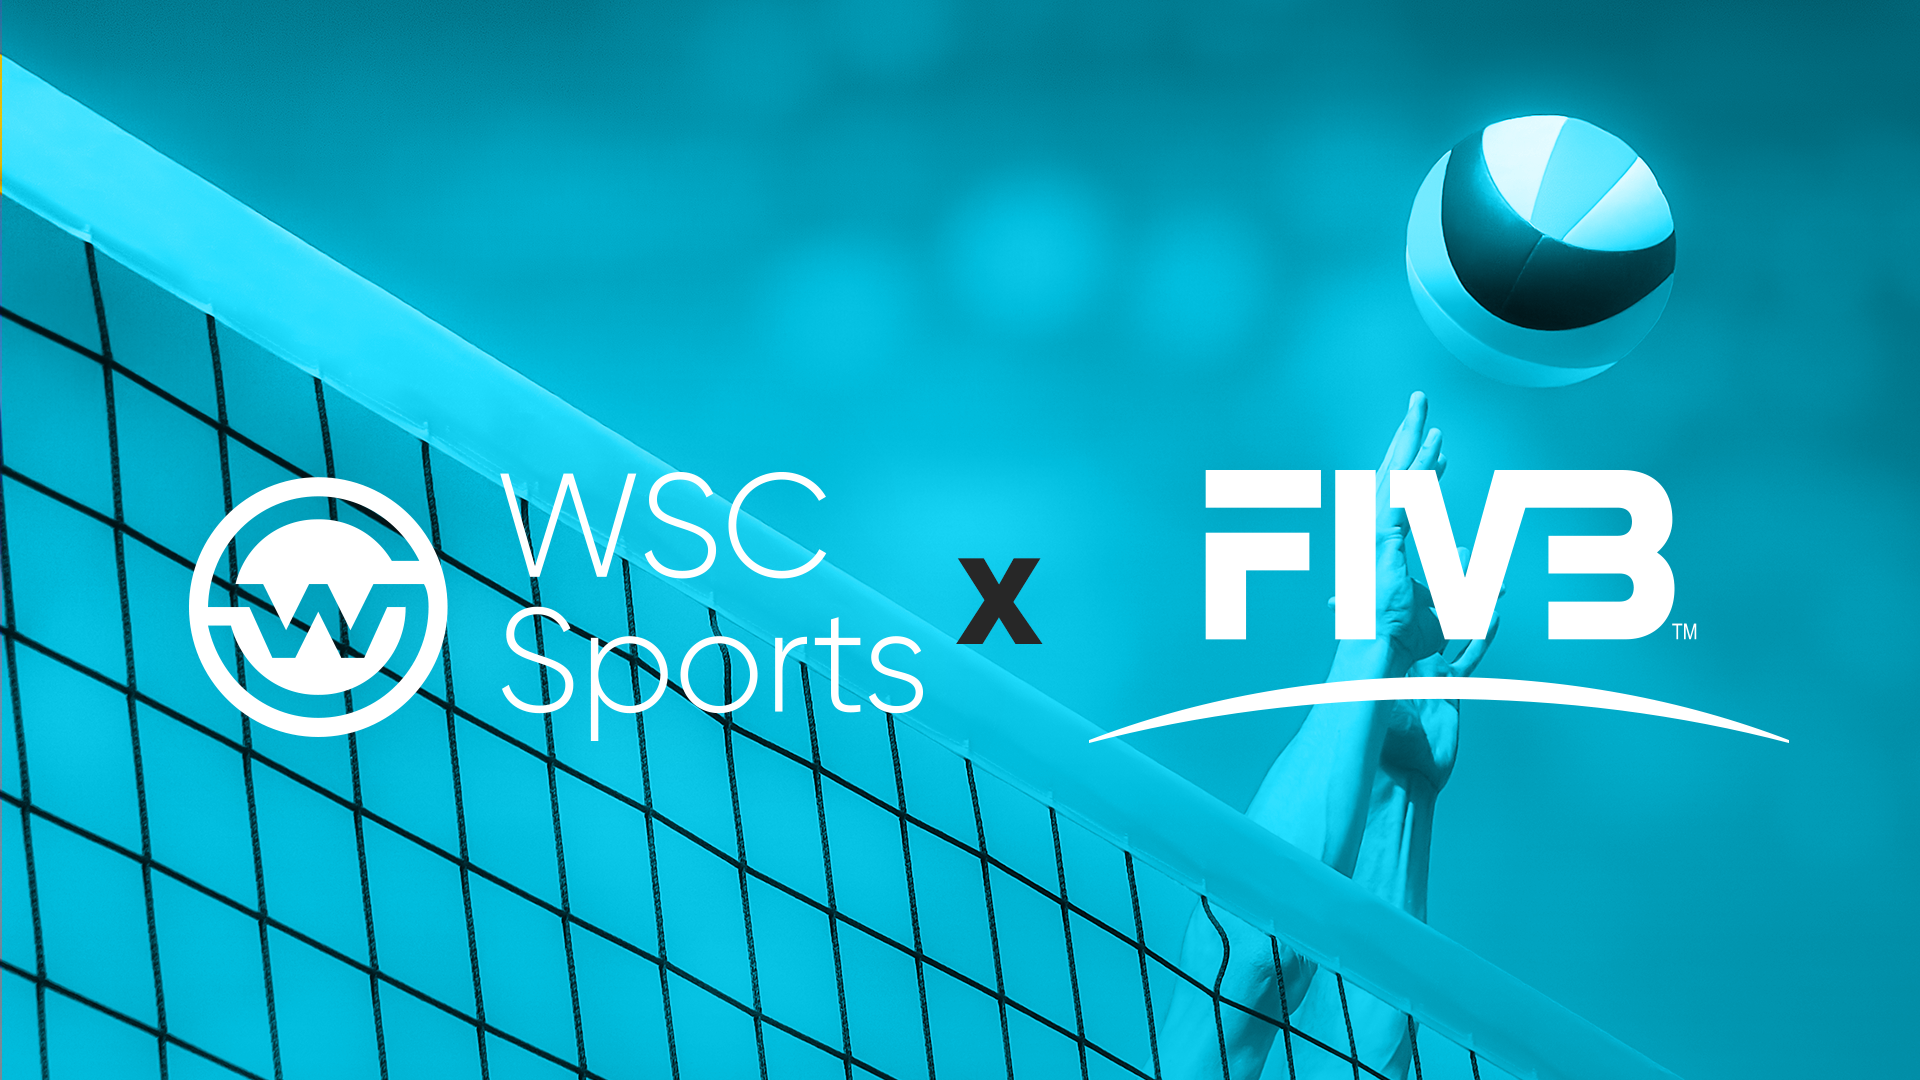 WSC Sports and FIVB have officially partnered after a successful initial period saw the Federation's audience double ©FIVB